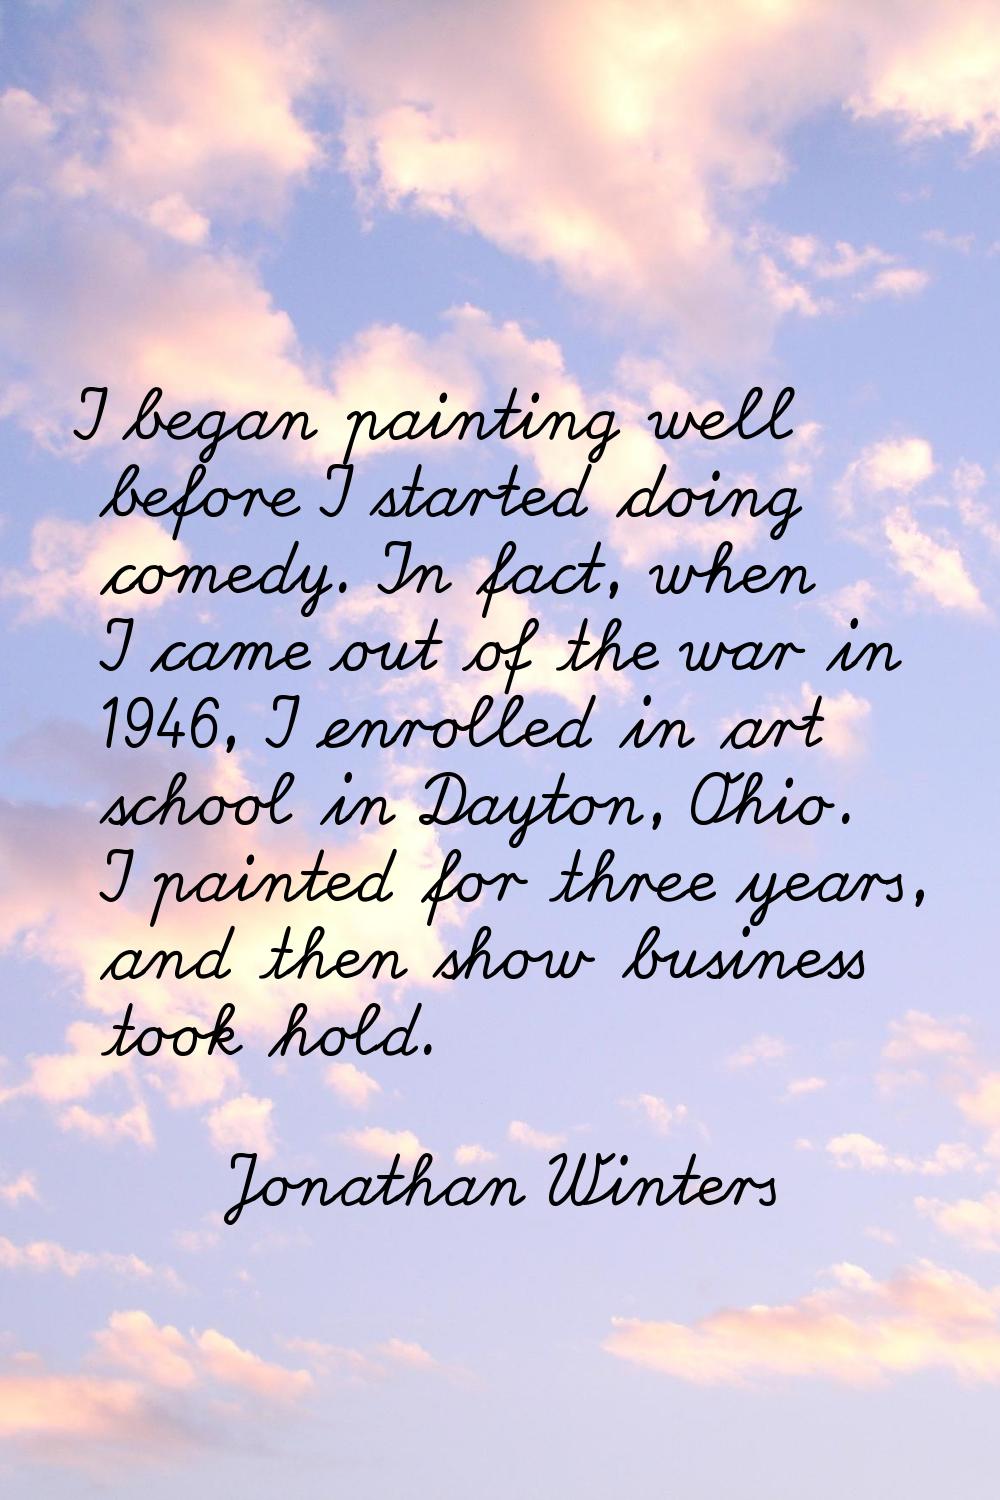 I began painting well before I started doing comedy. In fact, when I came out of the war in 1946, I